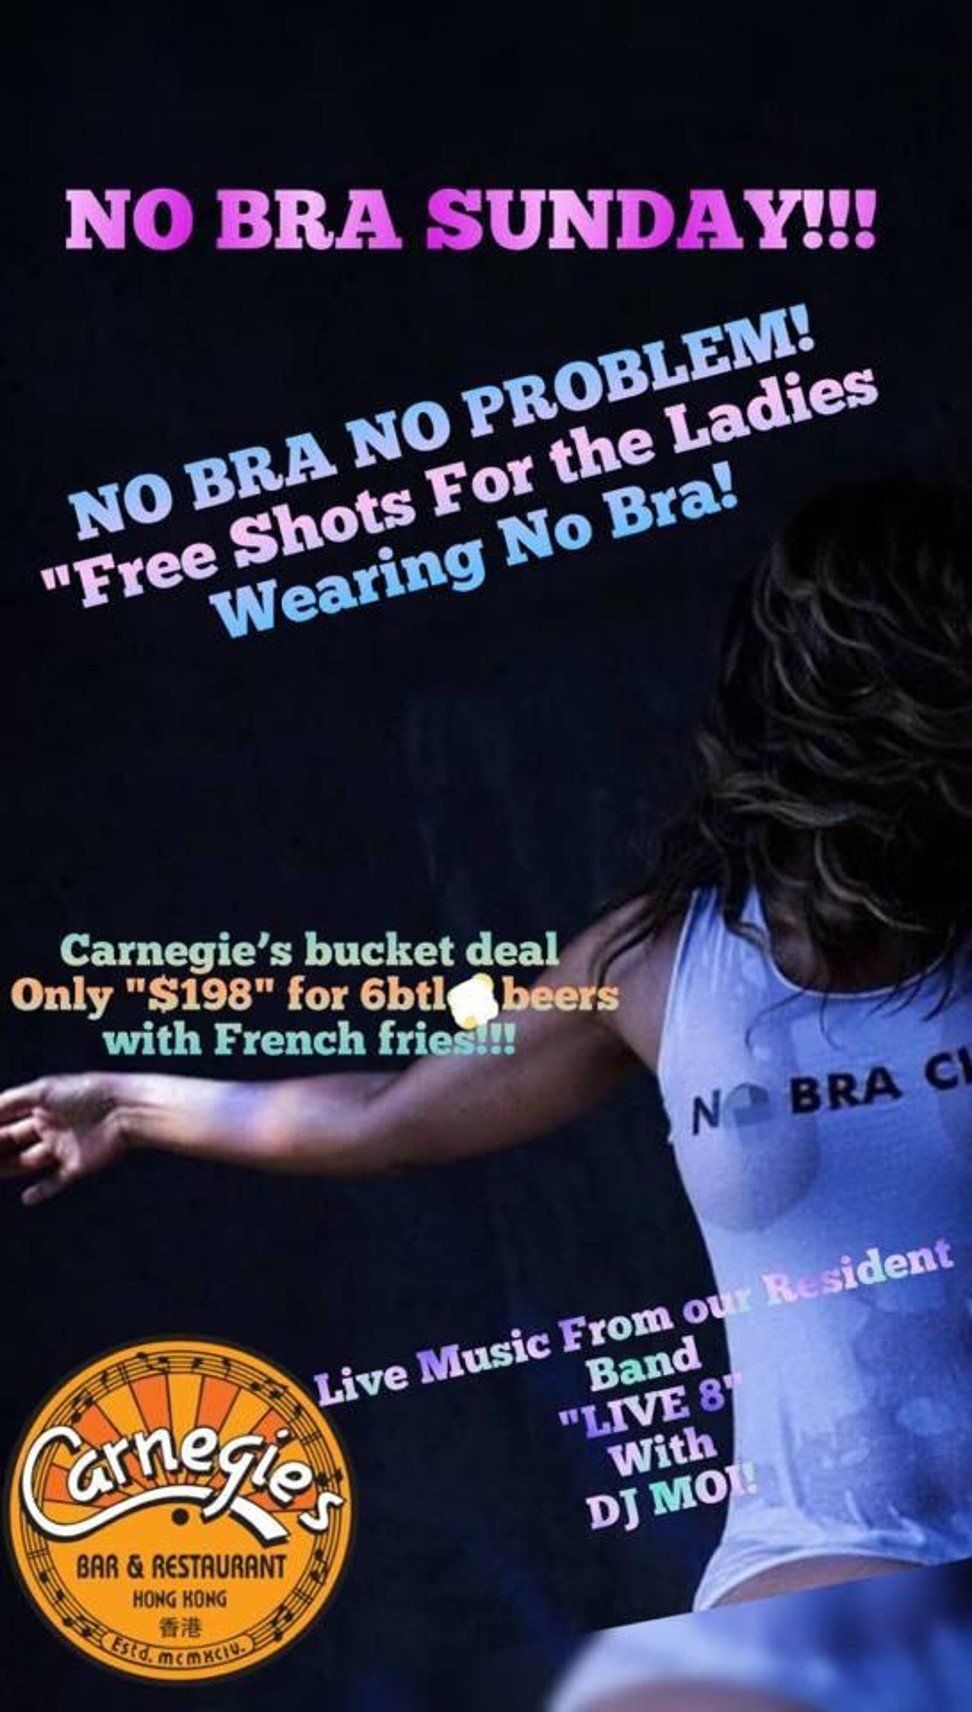 A promotional image for Carnegies’ No Bra Sunday event.